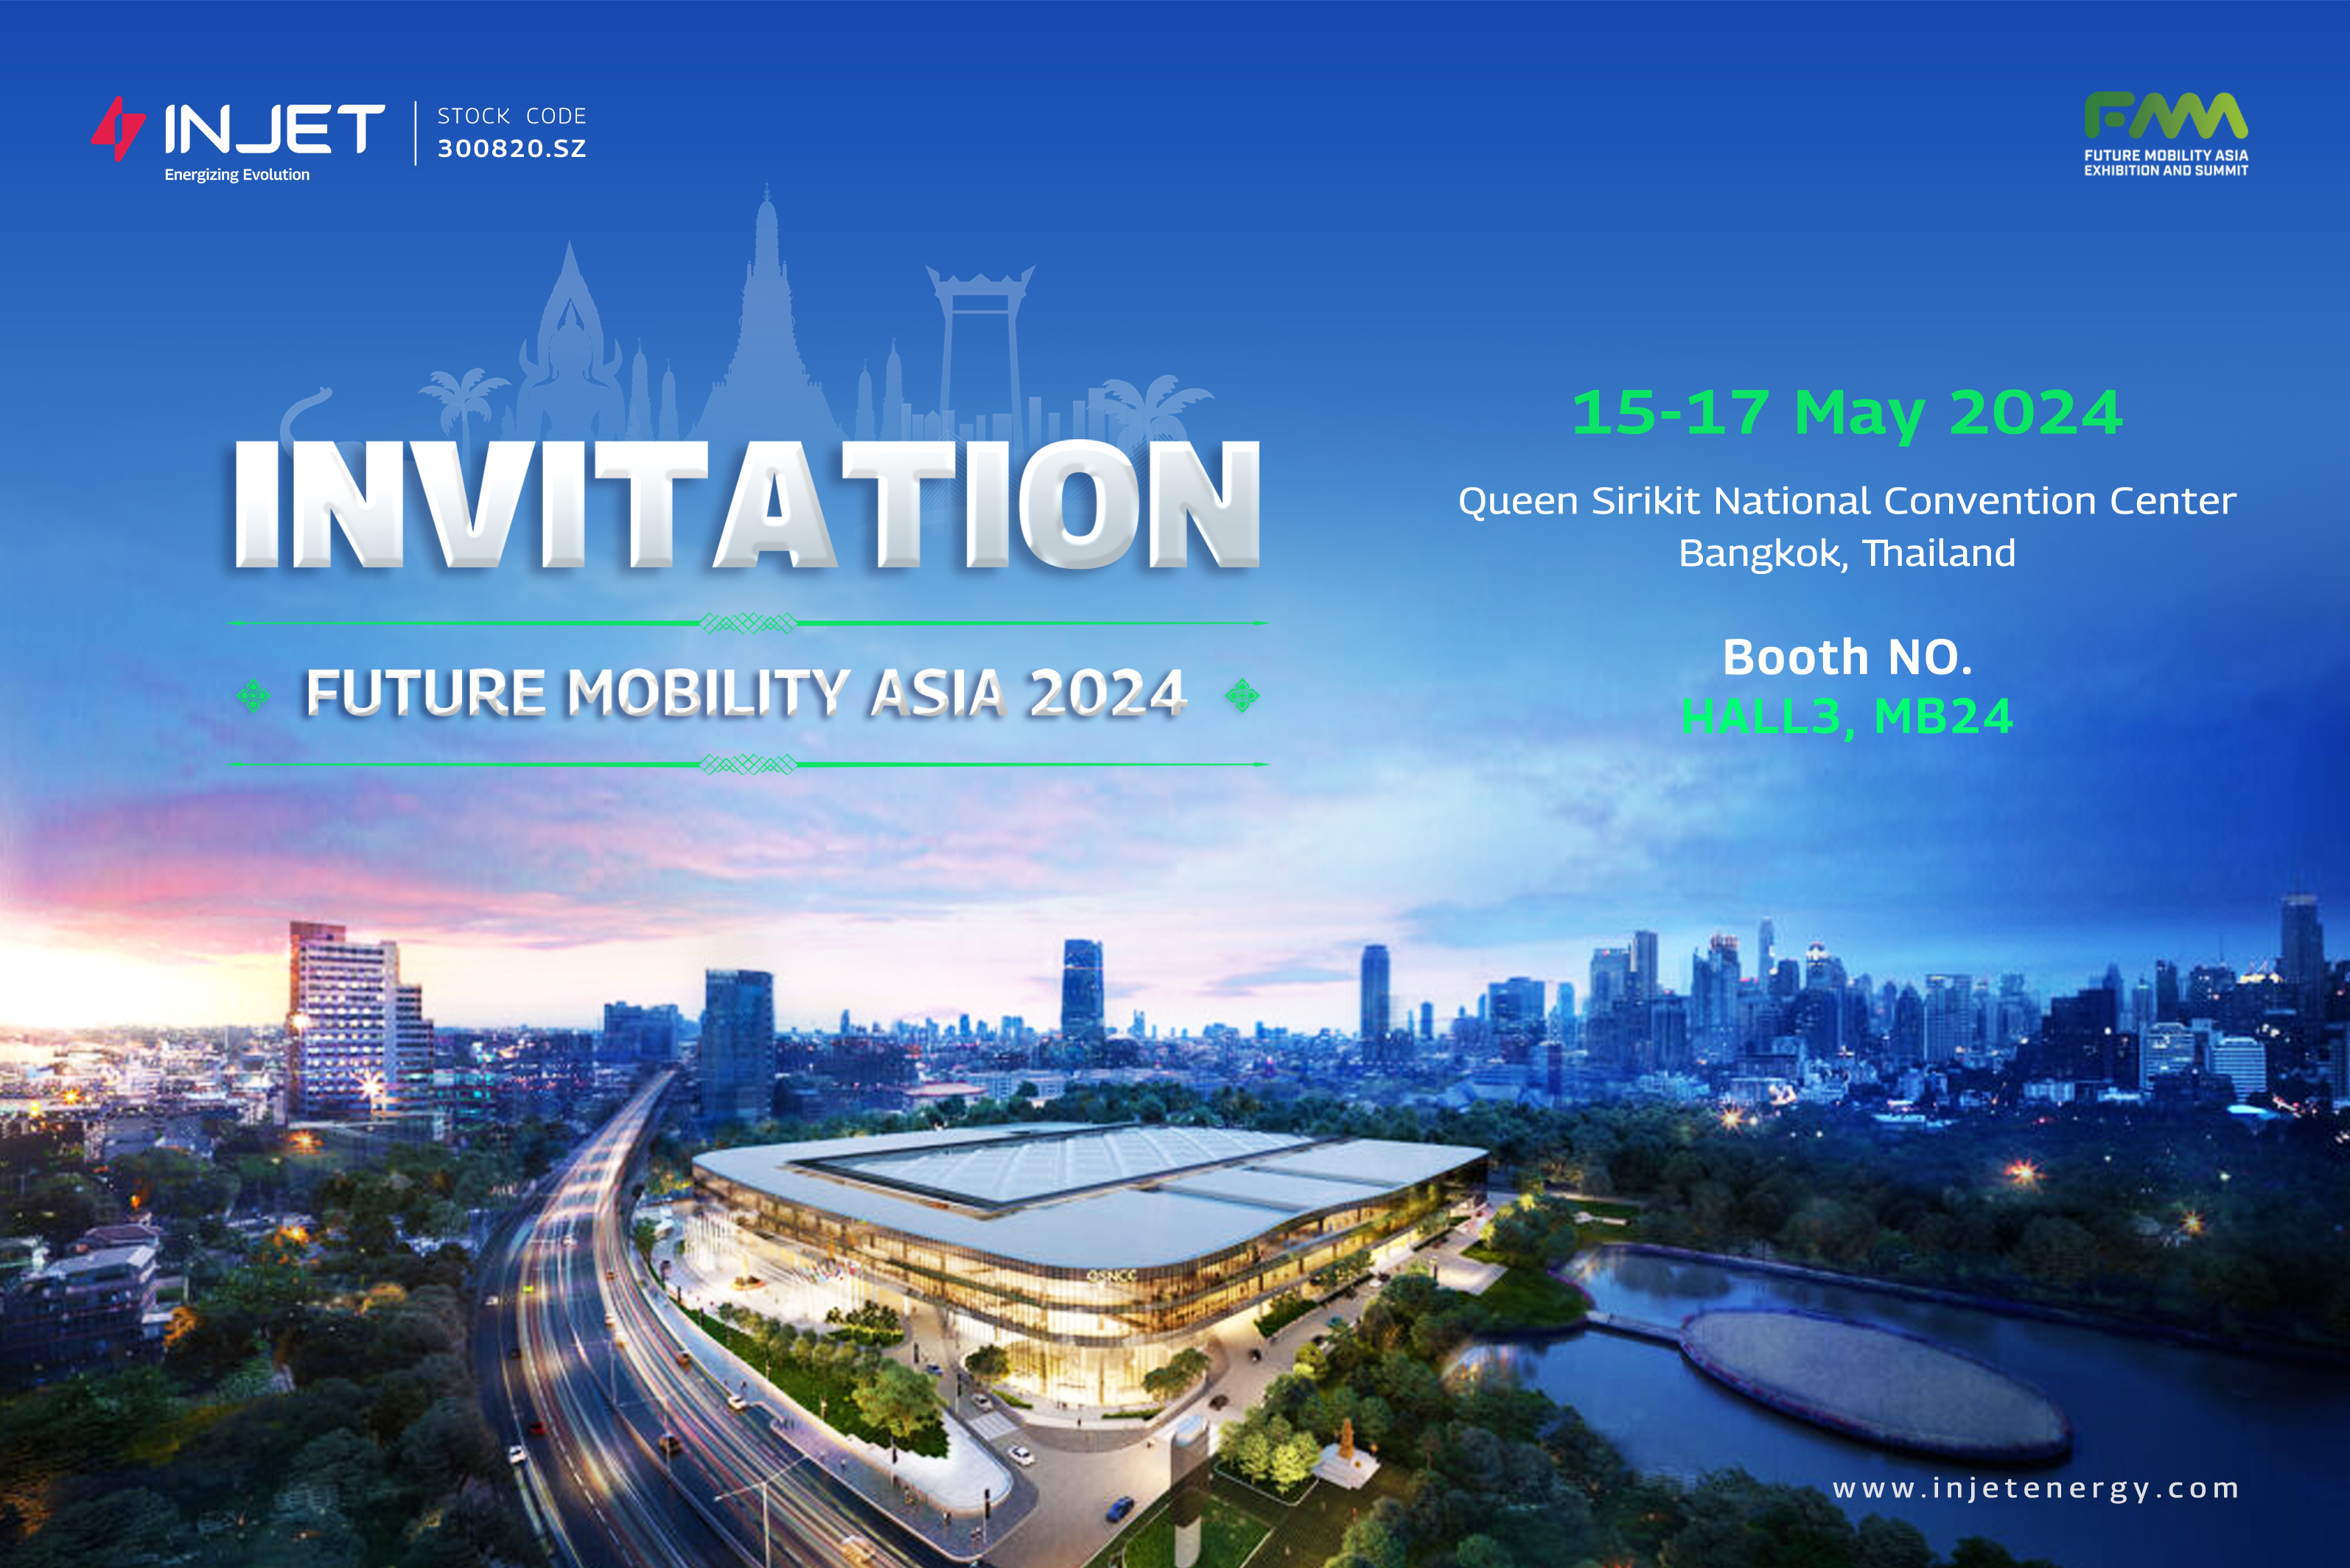 Join Injet New Energy at FUTURE MOBILITY ASIA 2024!